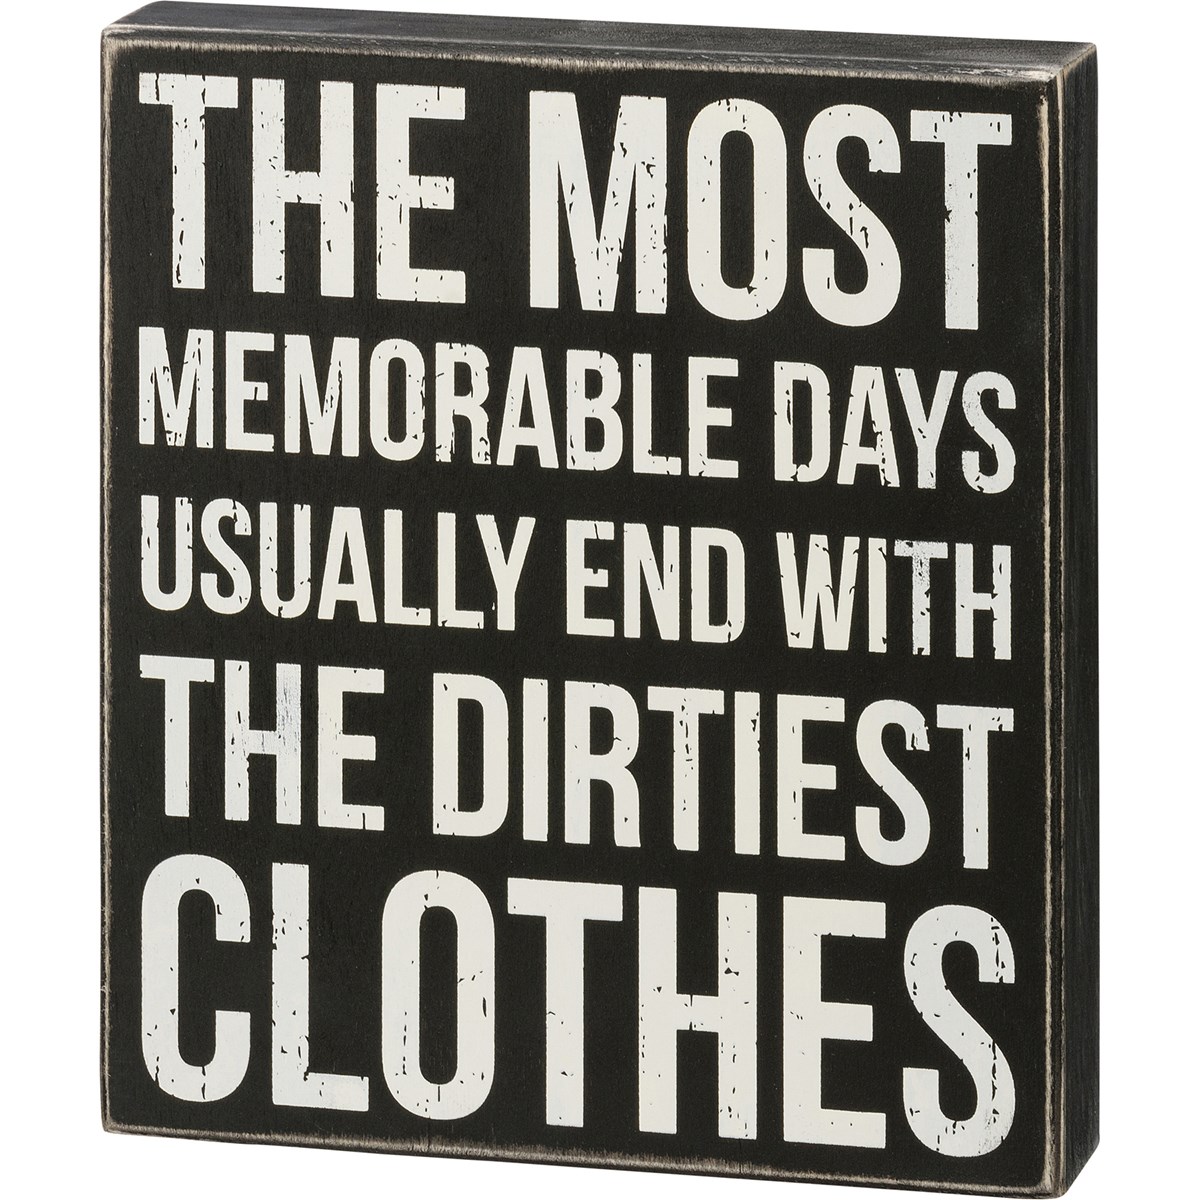 Memorable Days With Dirtiest Clothes Box Sign - Wood